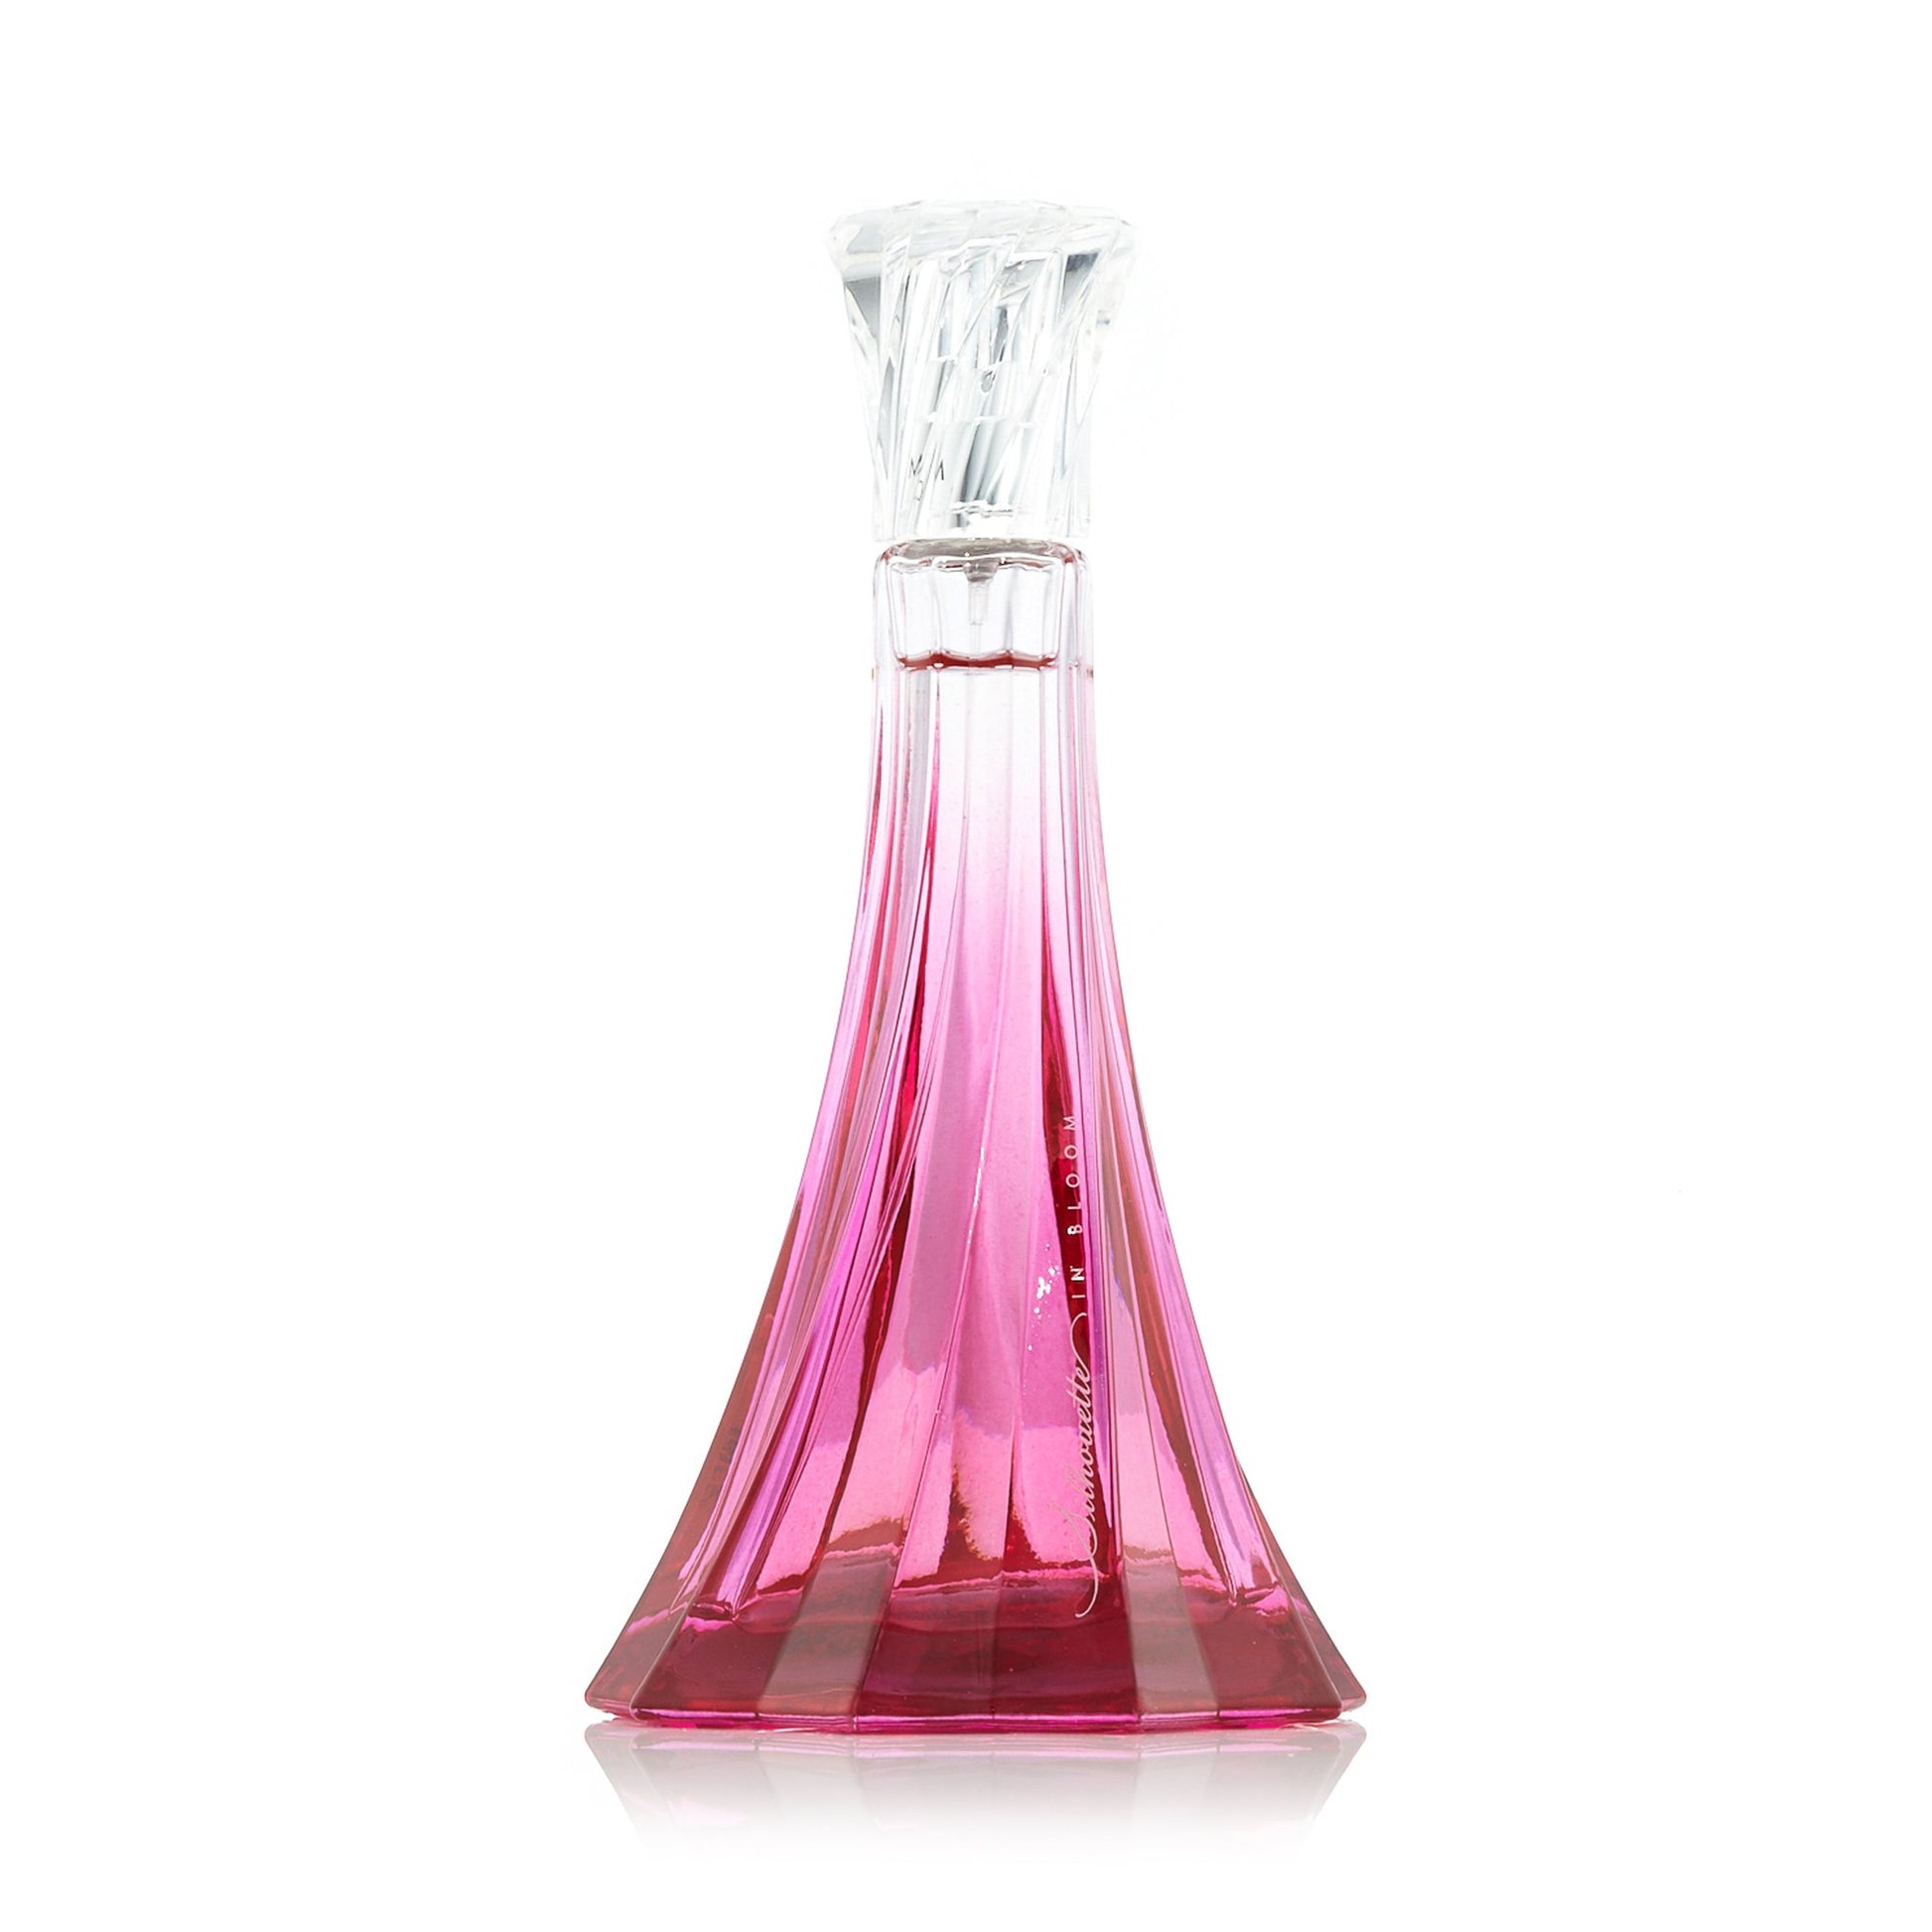 Silhouette in Bloom Eau de Parfum Spray for Women by Christian Siriano, Product image 1